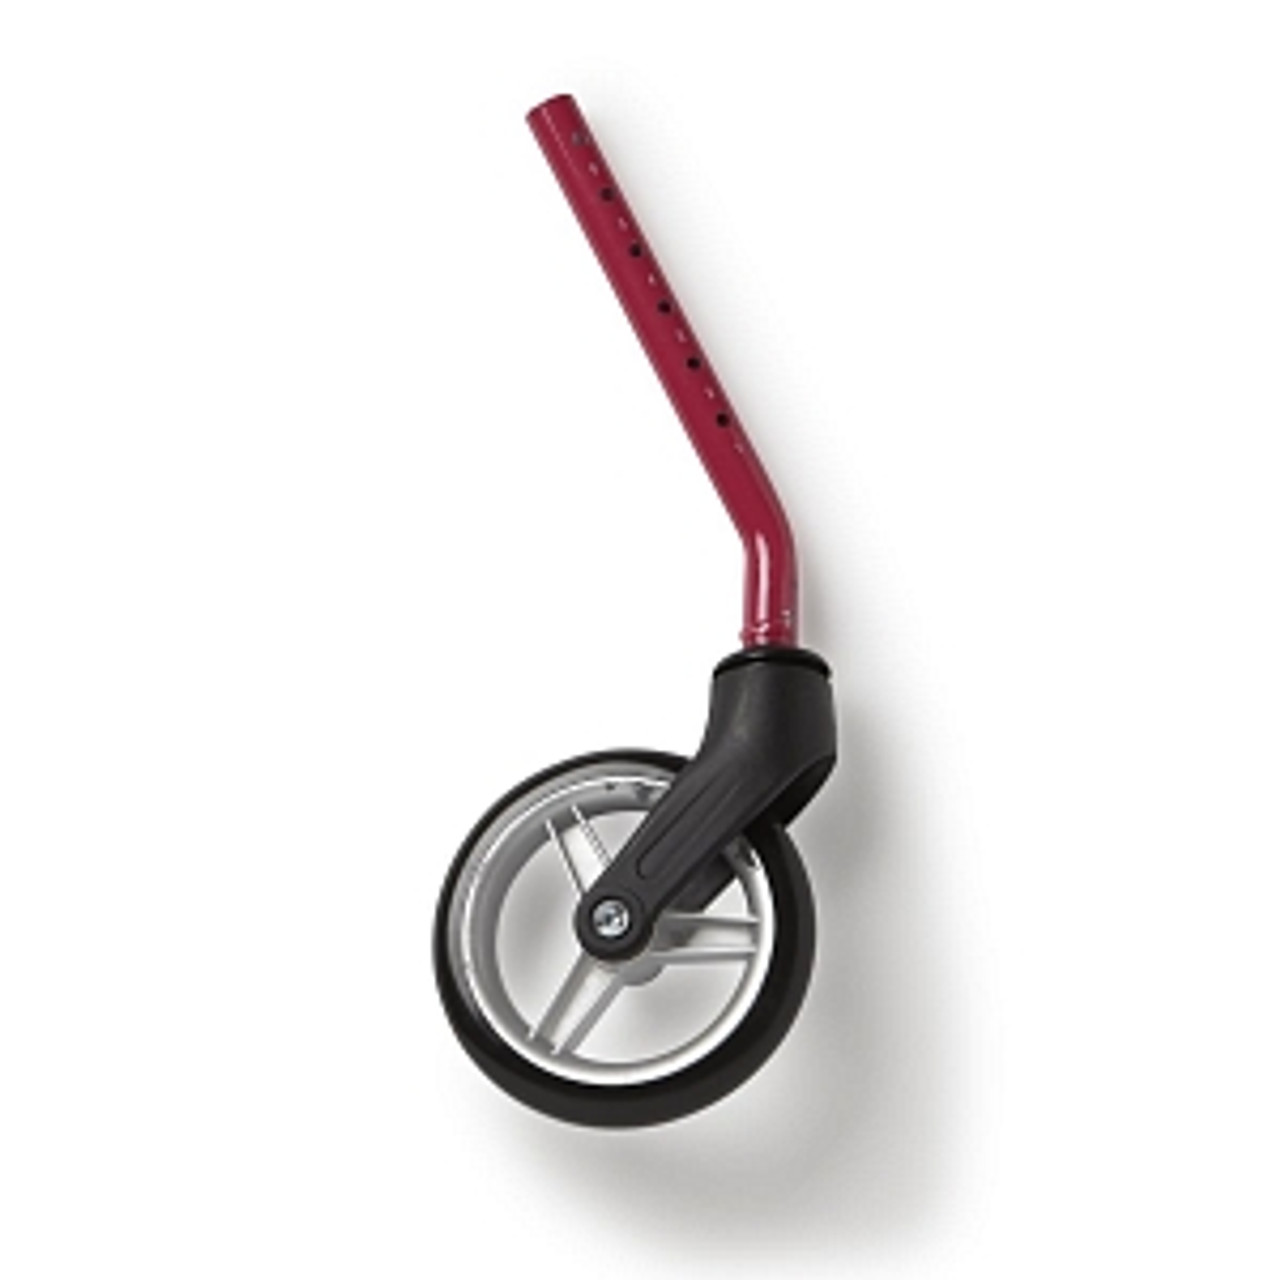 Parts and accessories for the Medline Posh Pink Zebra Rollator (MDS86835SHE)